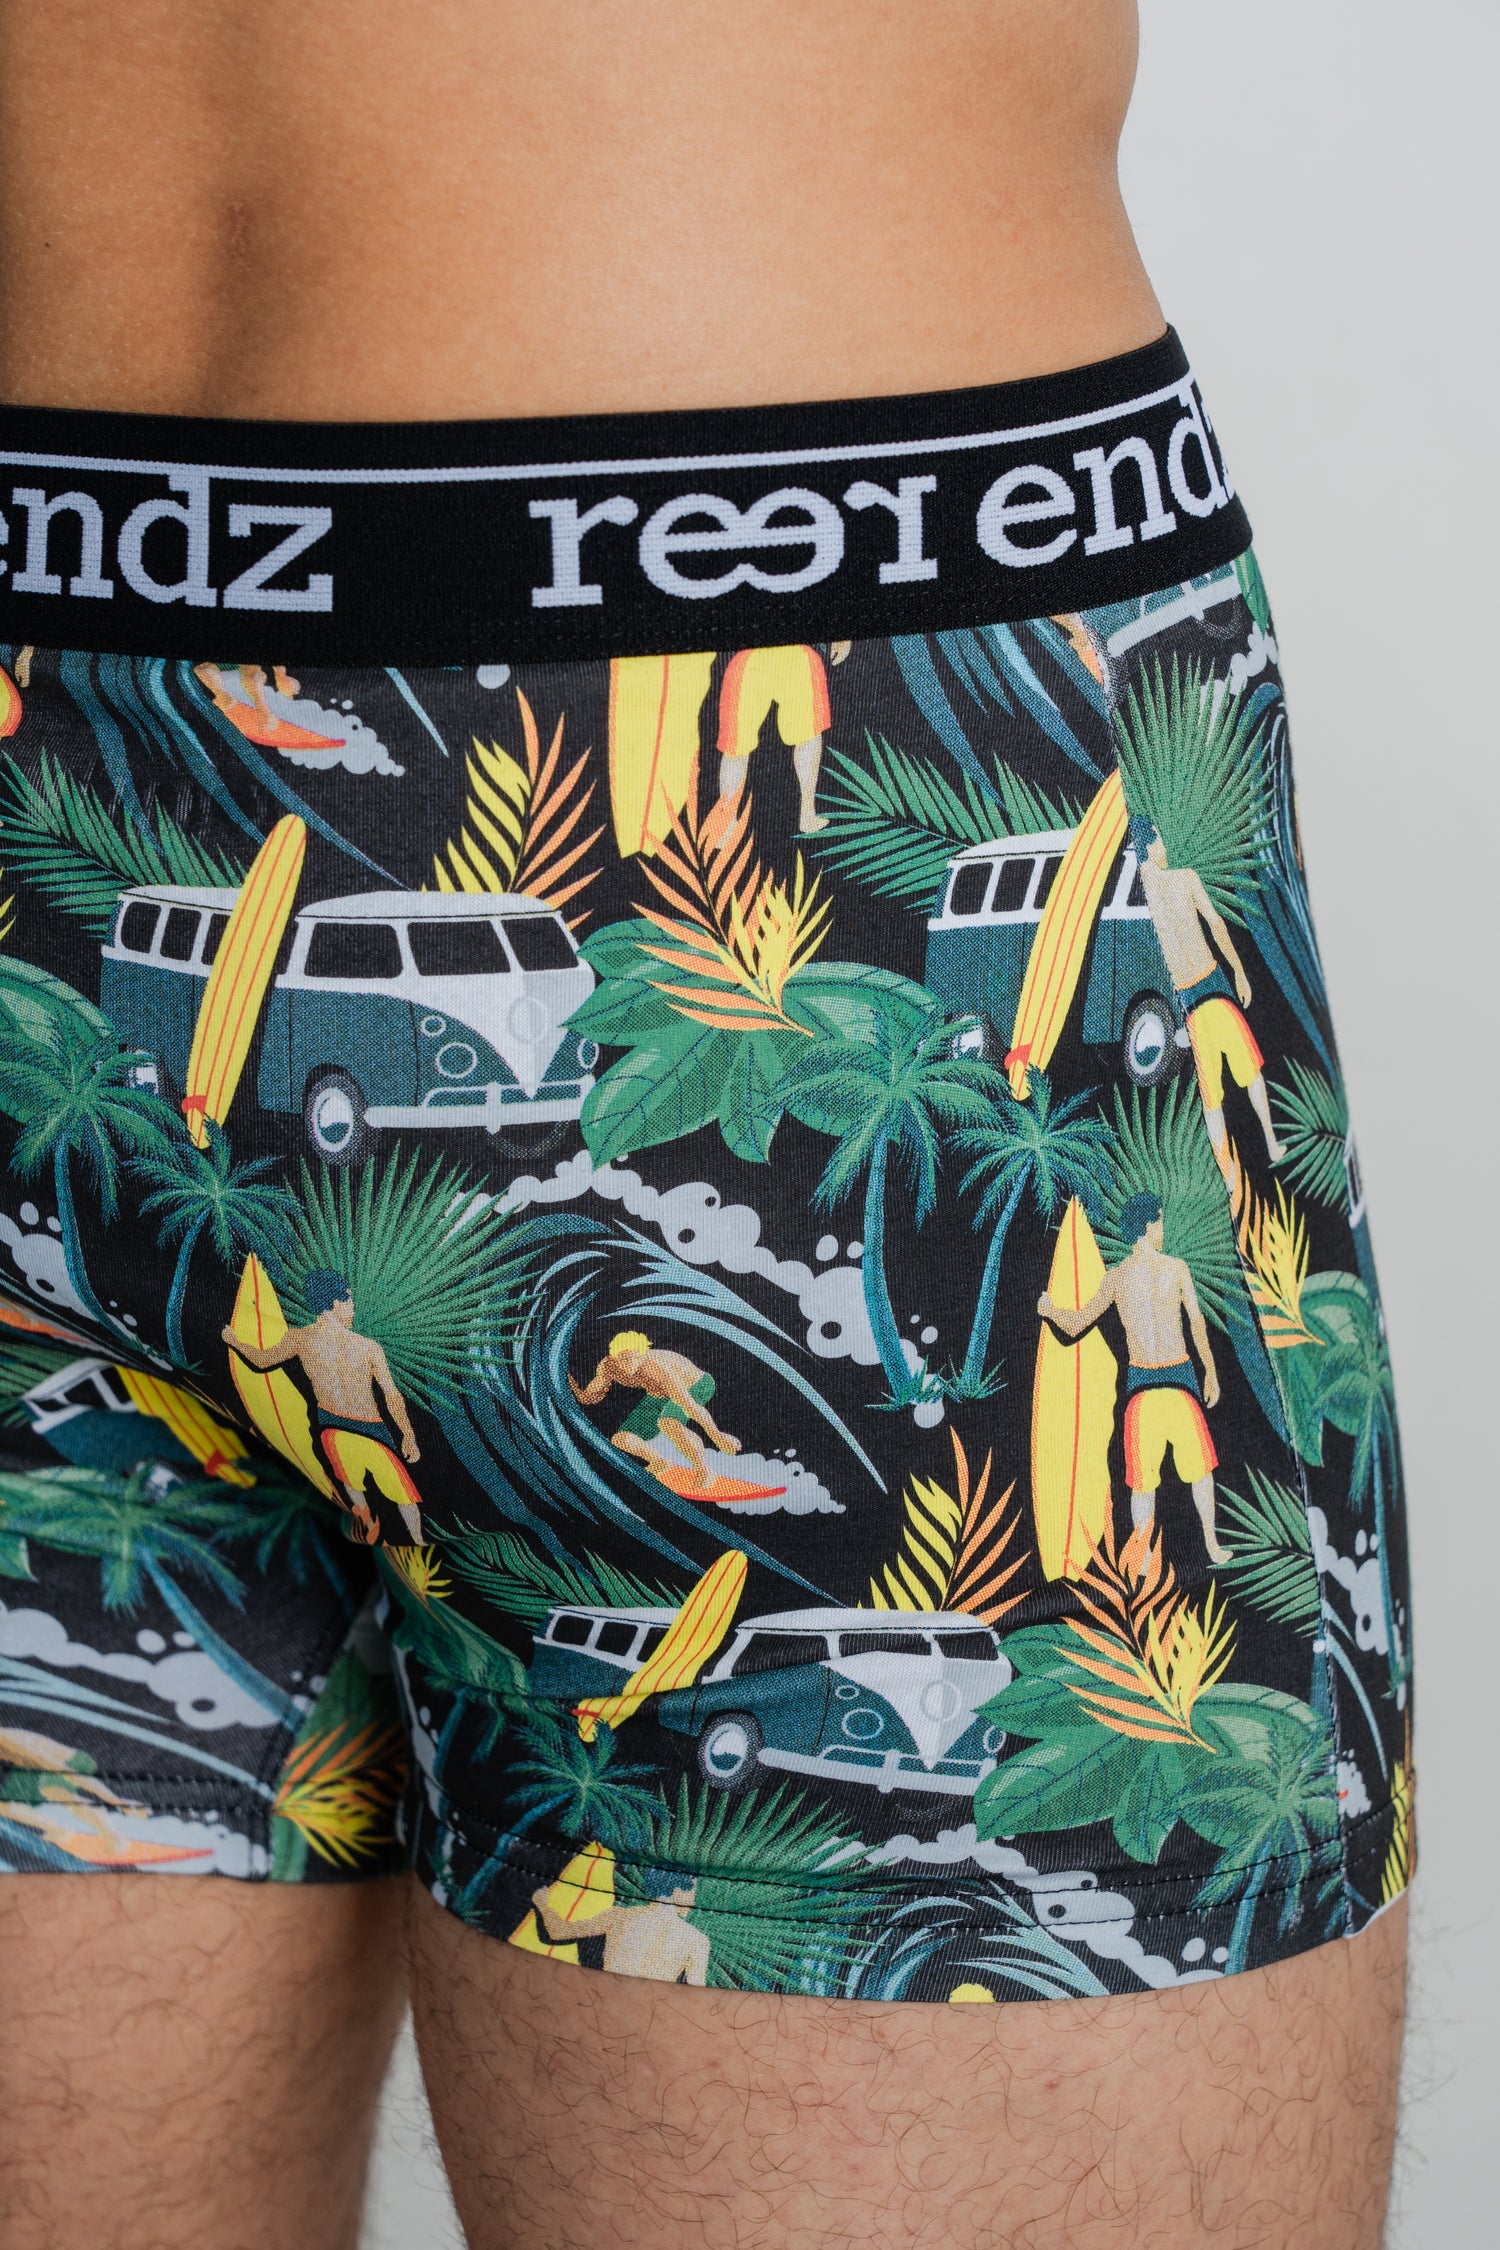 Eco-conscious fashion: Male model flaunts Reer Endz men's trunks in the stylish Offshore Vibes Print, designed for unmatched comfort, thanks to Organic Cotton